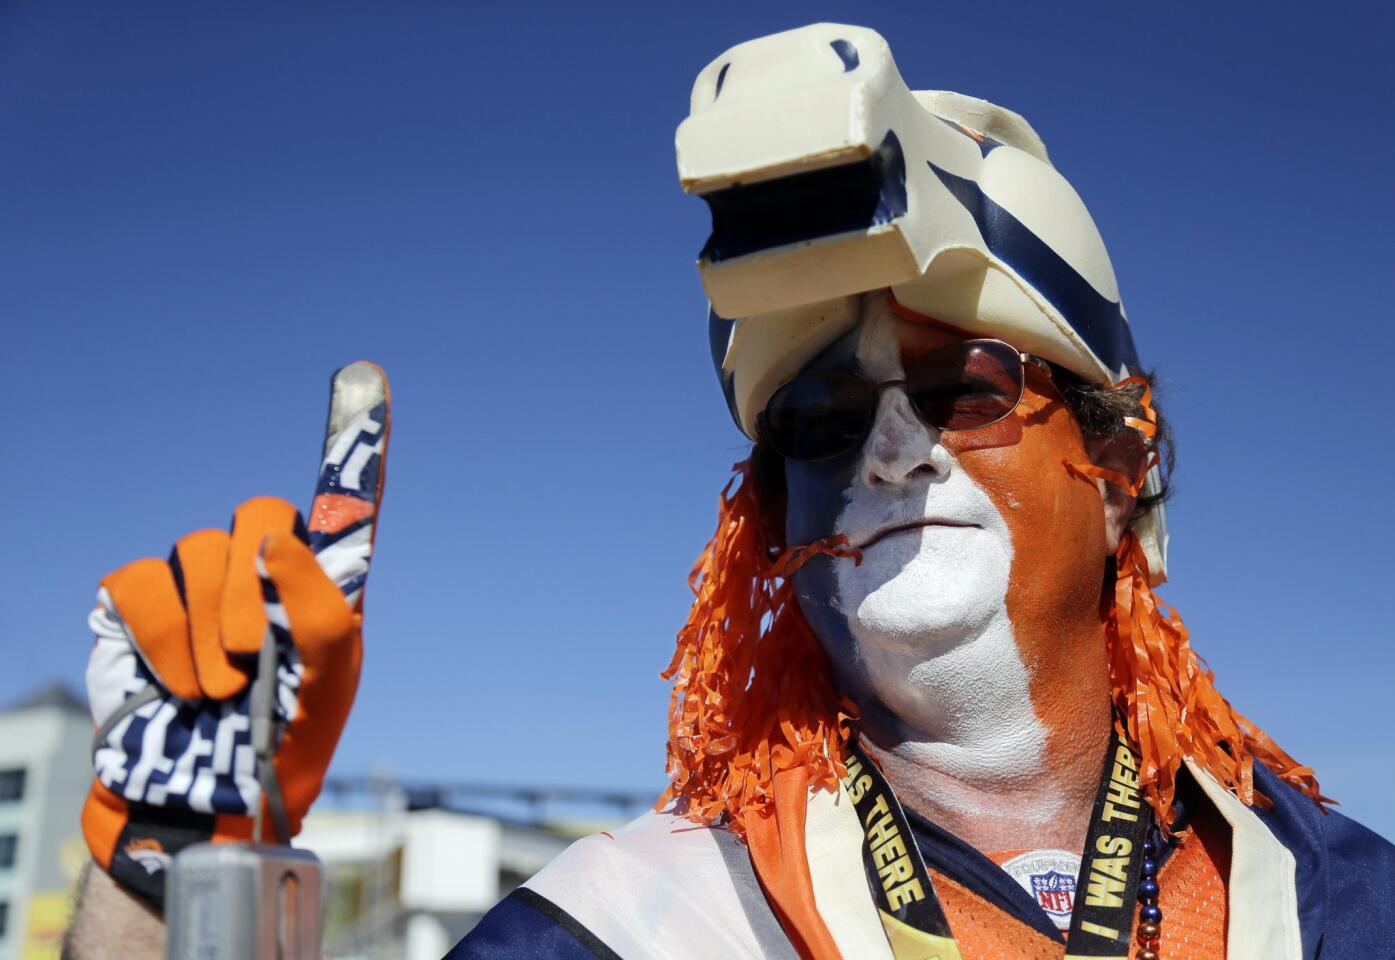 Dwayme Fox poses before the NFL Super Bowl 50 football game between the Denver Broncos and the Carolina Panthers, Sunday, Feb. 7, 2016, in Santa Clara, Calif. (AP Photo/Julie Jacobson)